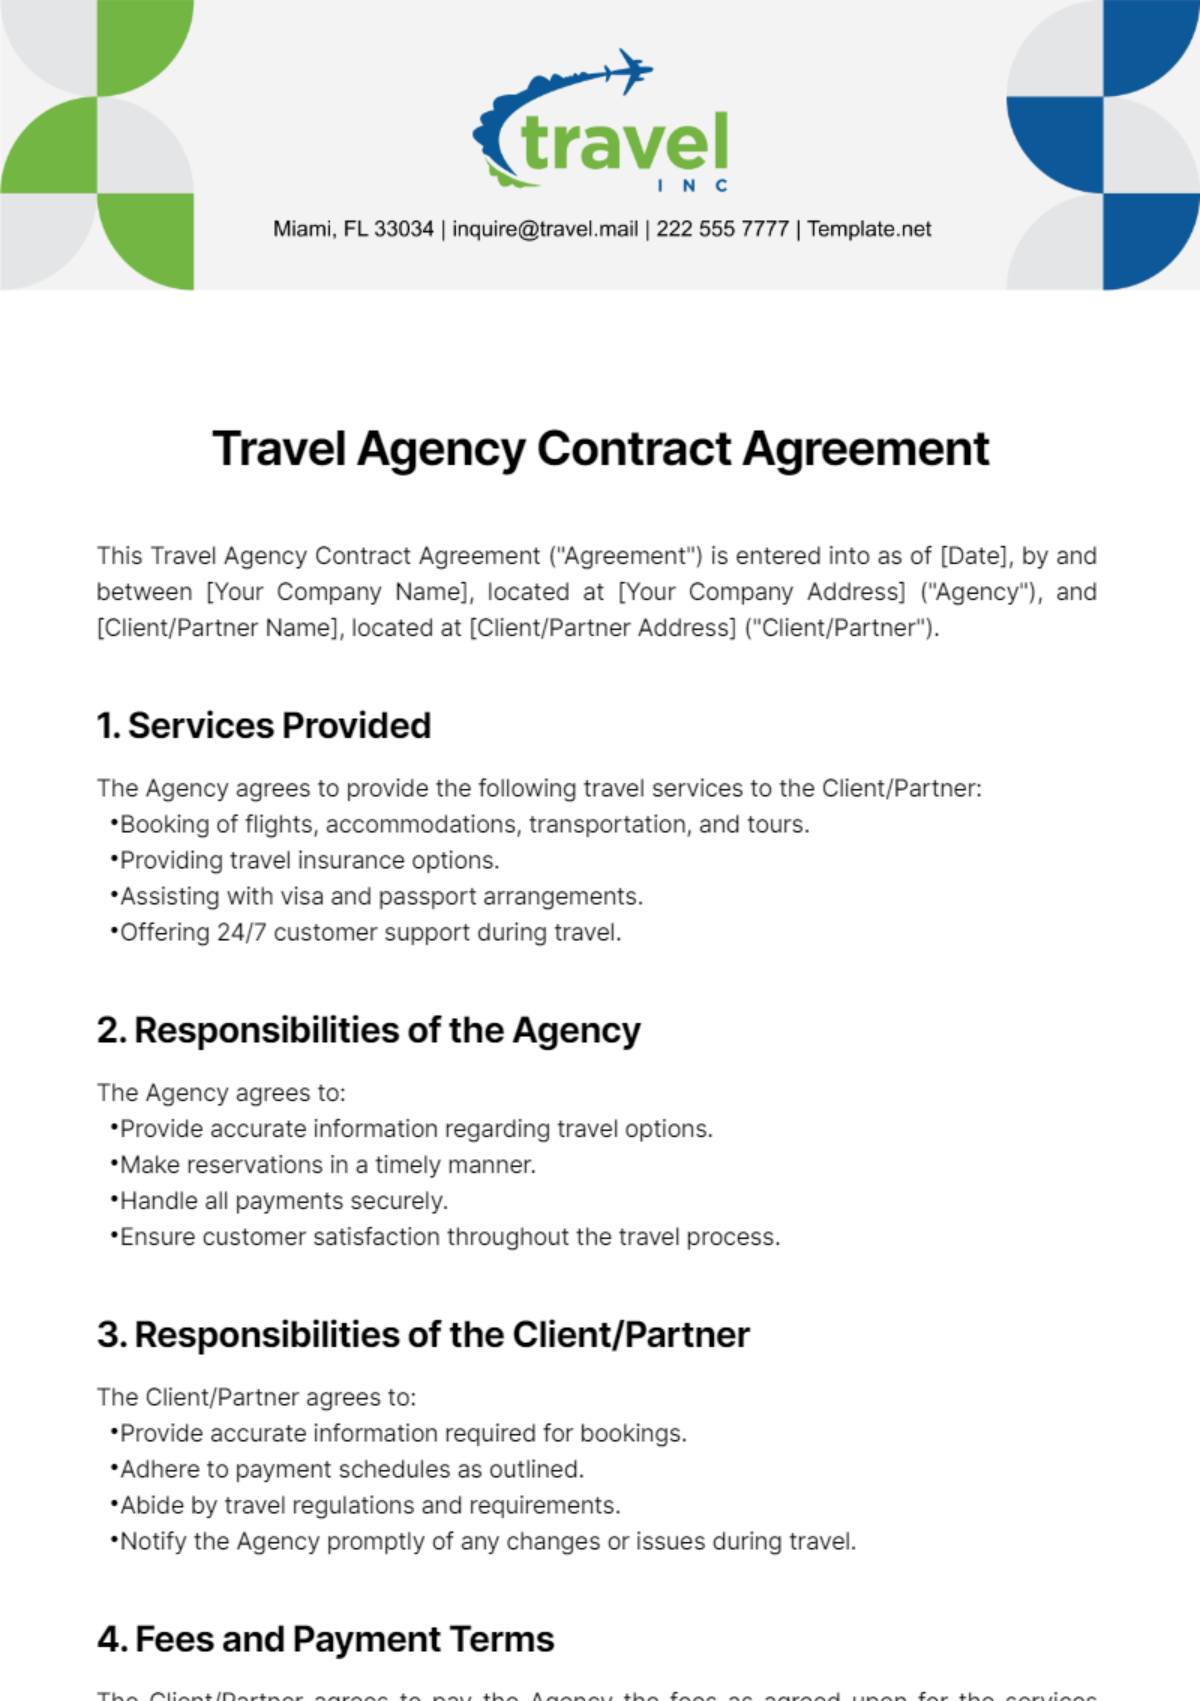 Travel Agency Contract Agreement Template